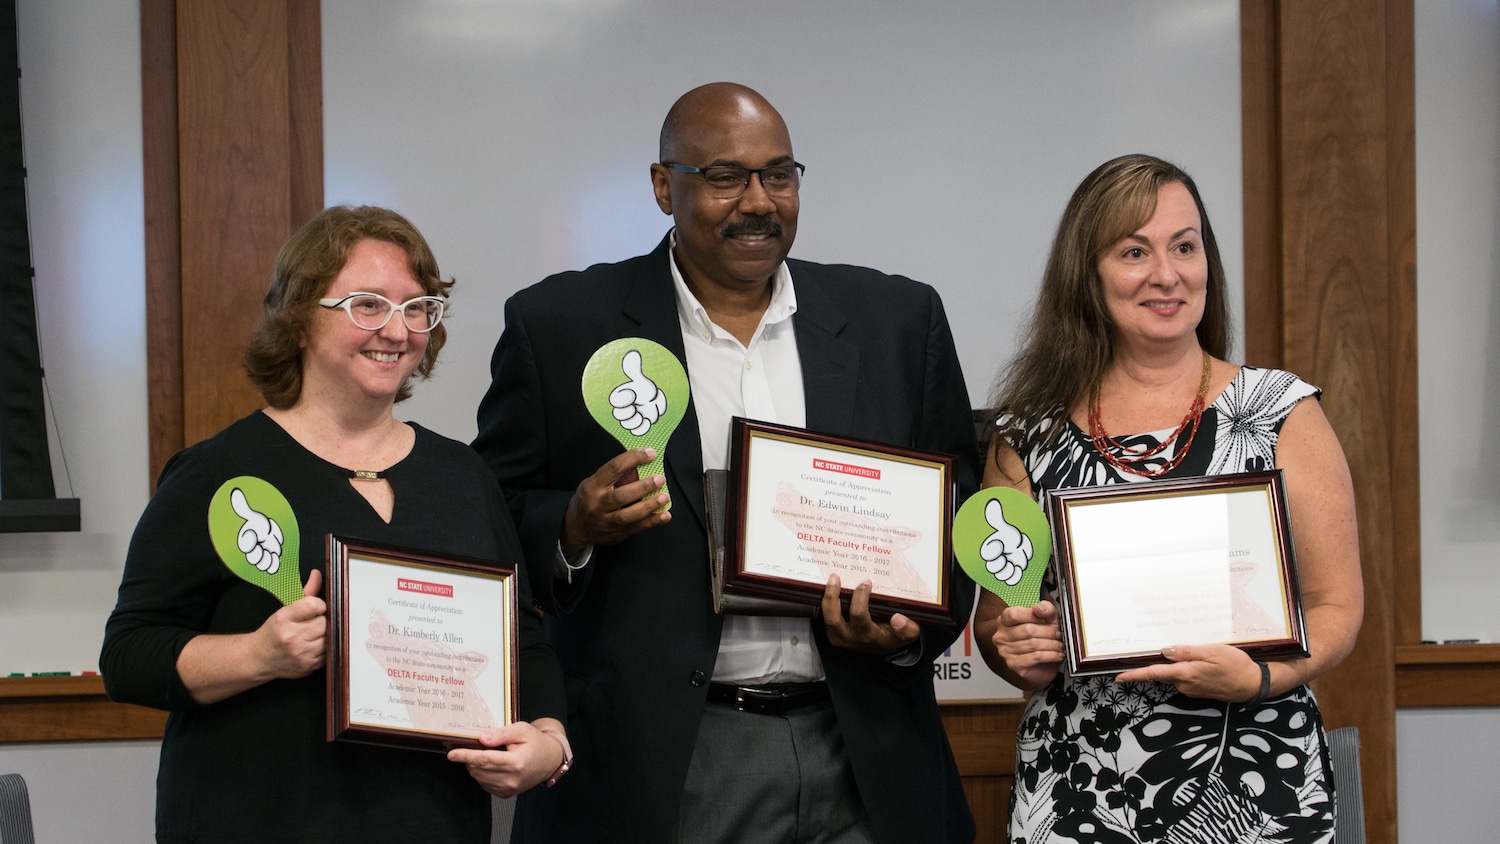 Three faculty members, including Maria Gallardo-Williams (far right) hold their completion certificates from the DELTA Faculty Fellows program.